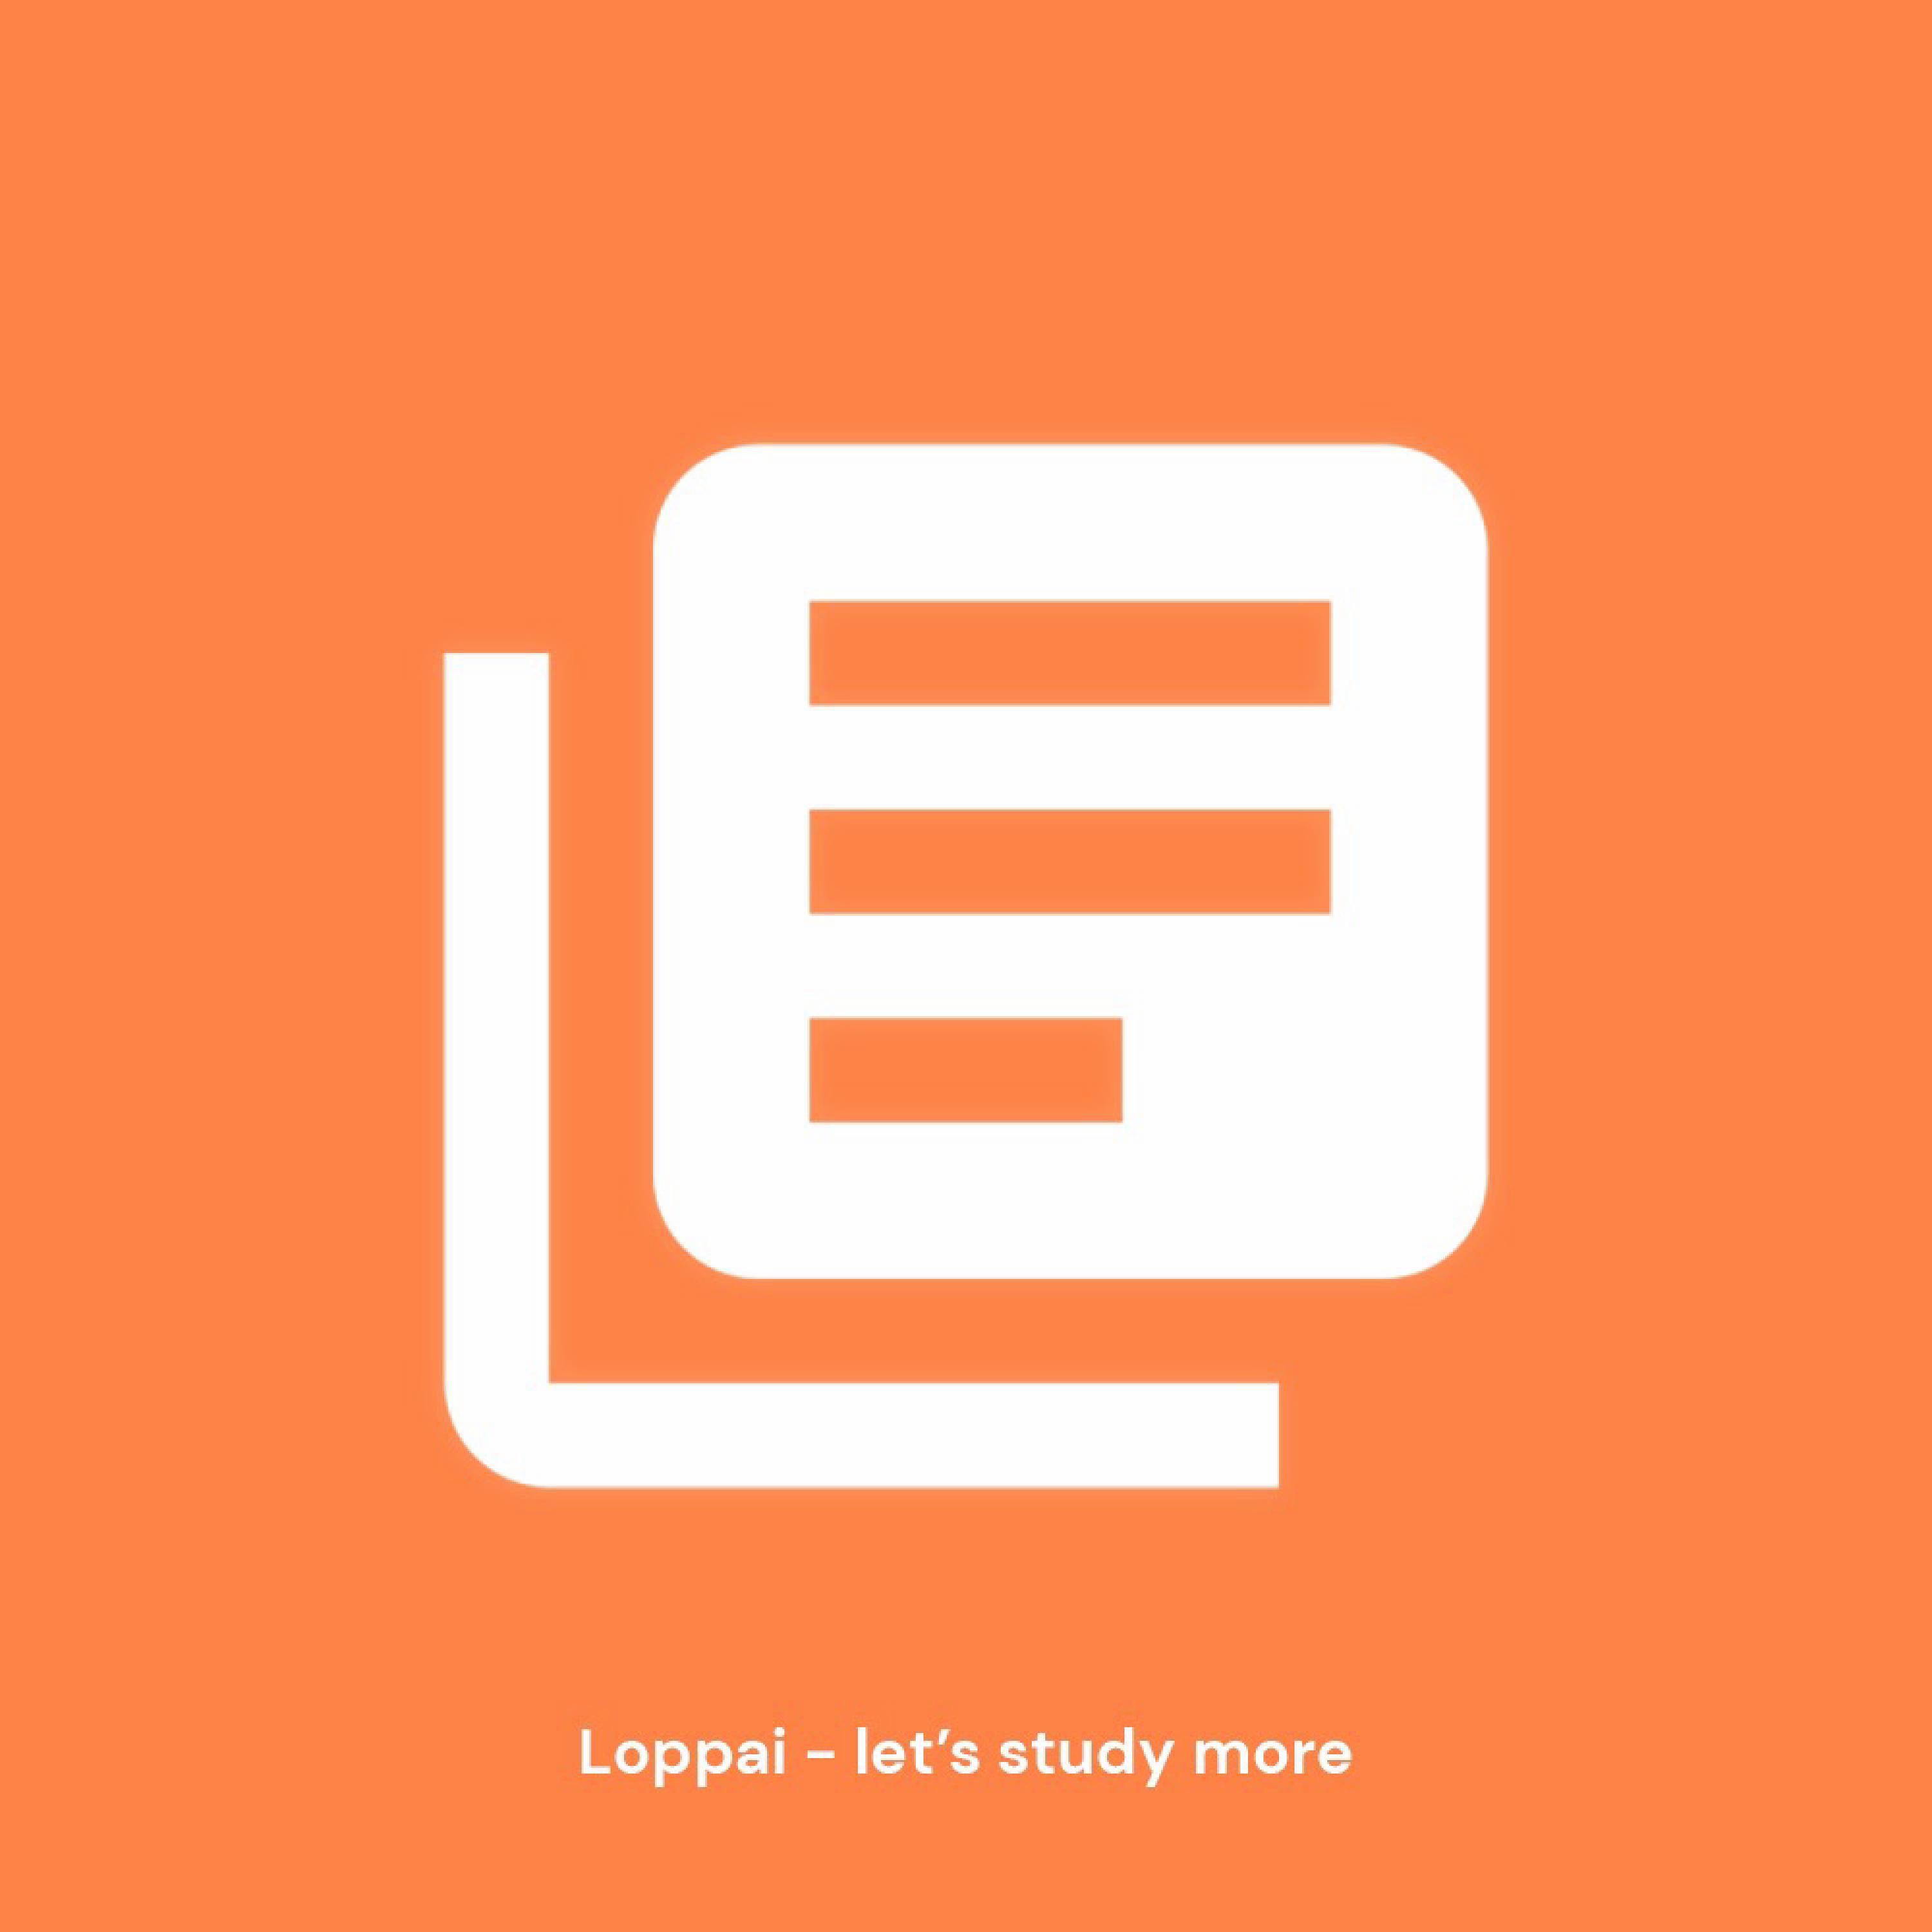 Loppai - Let's study more